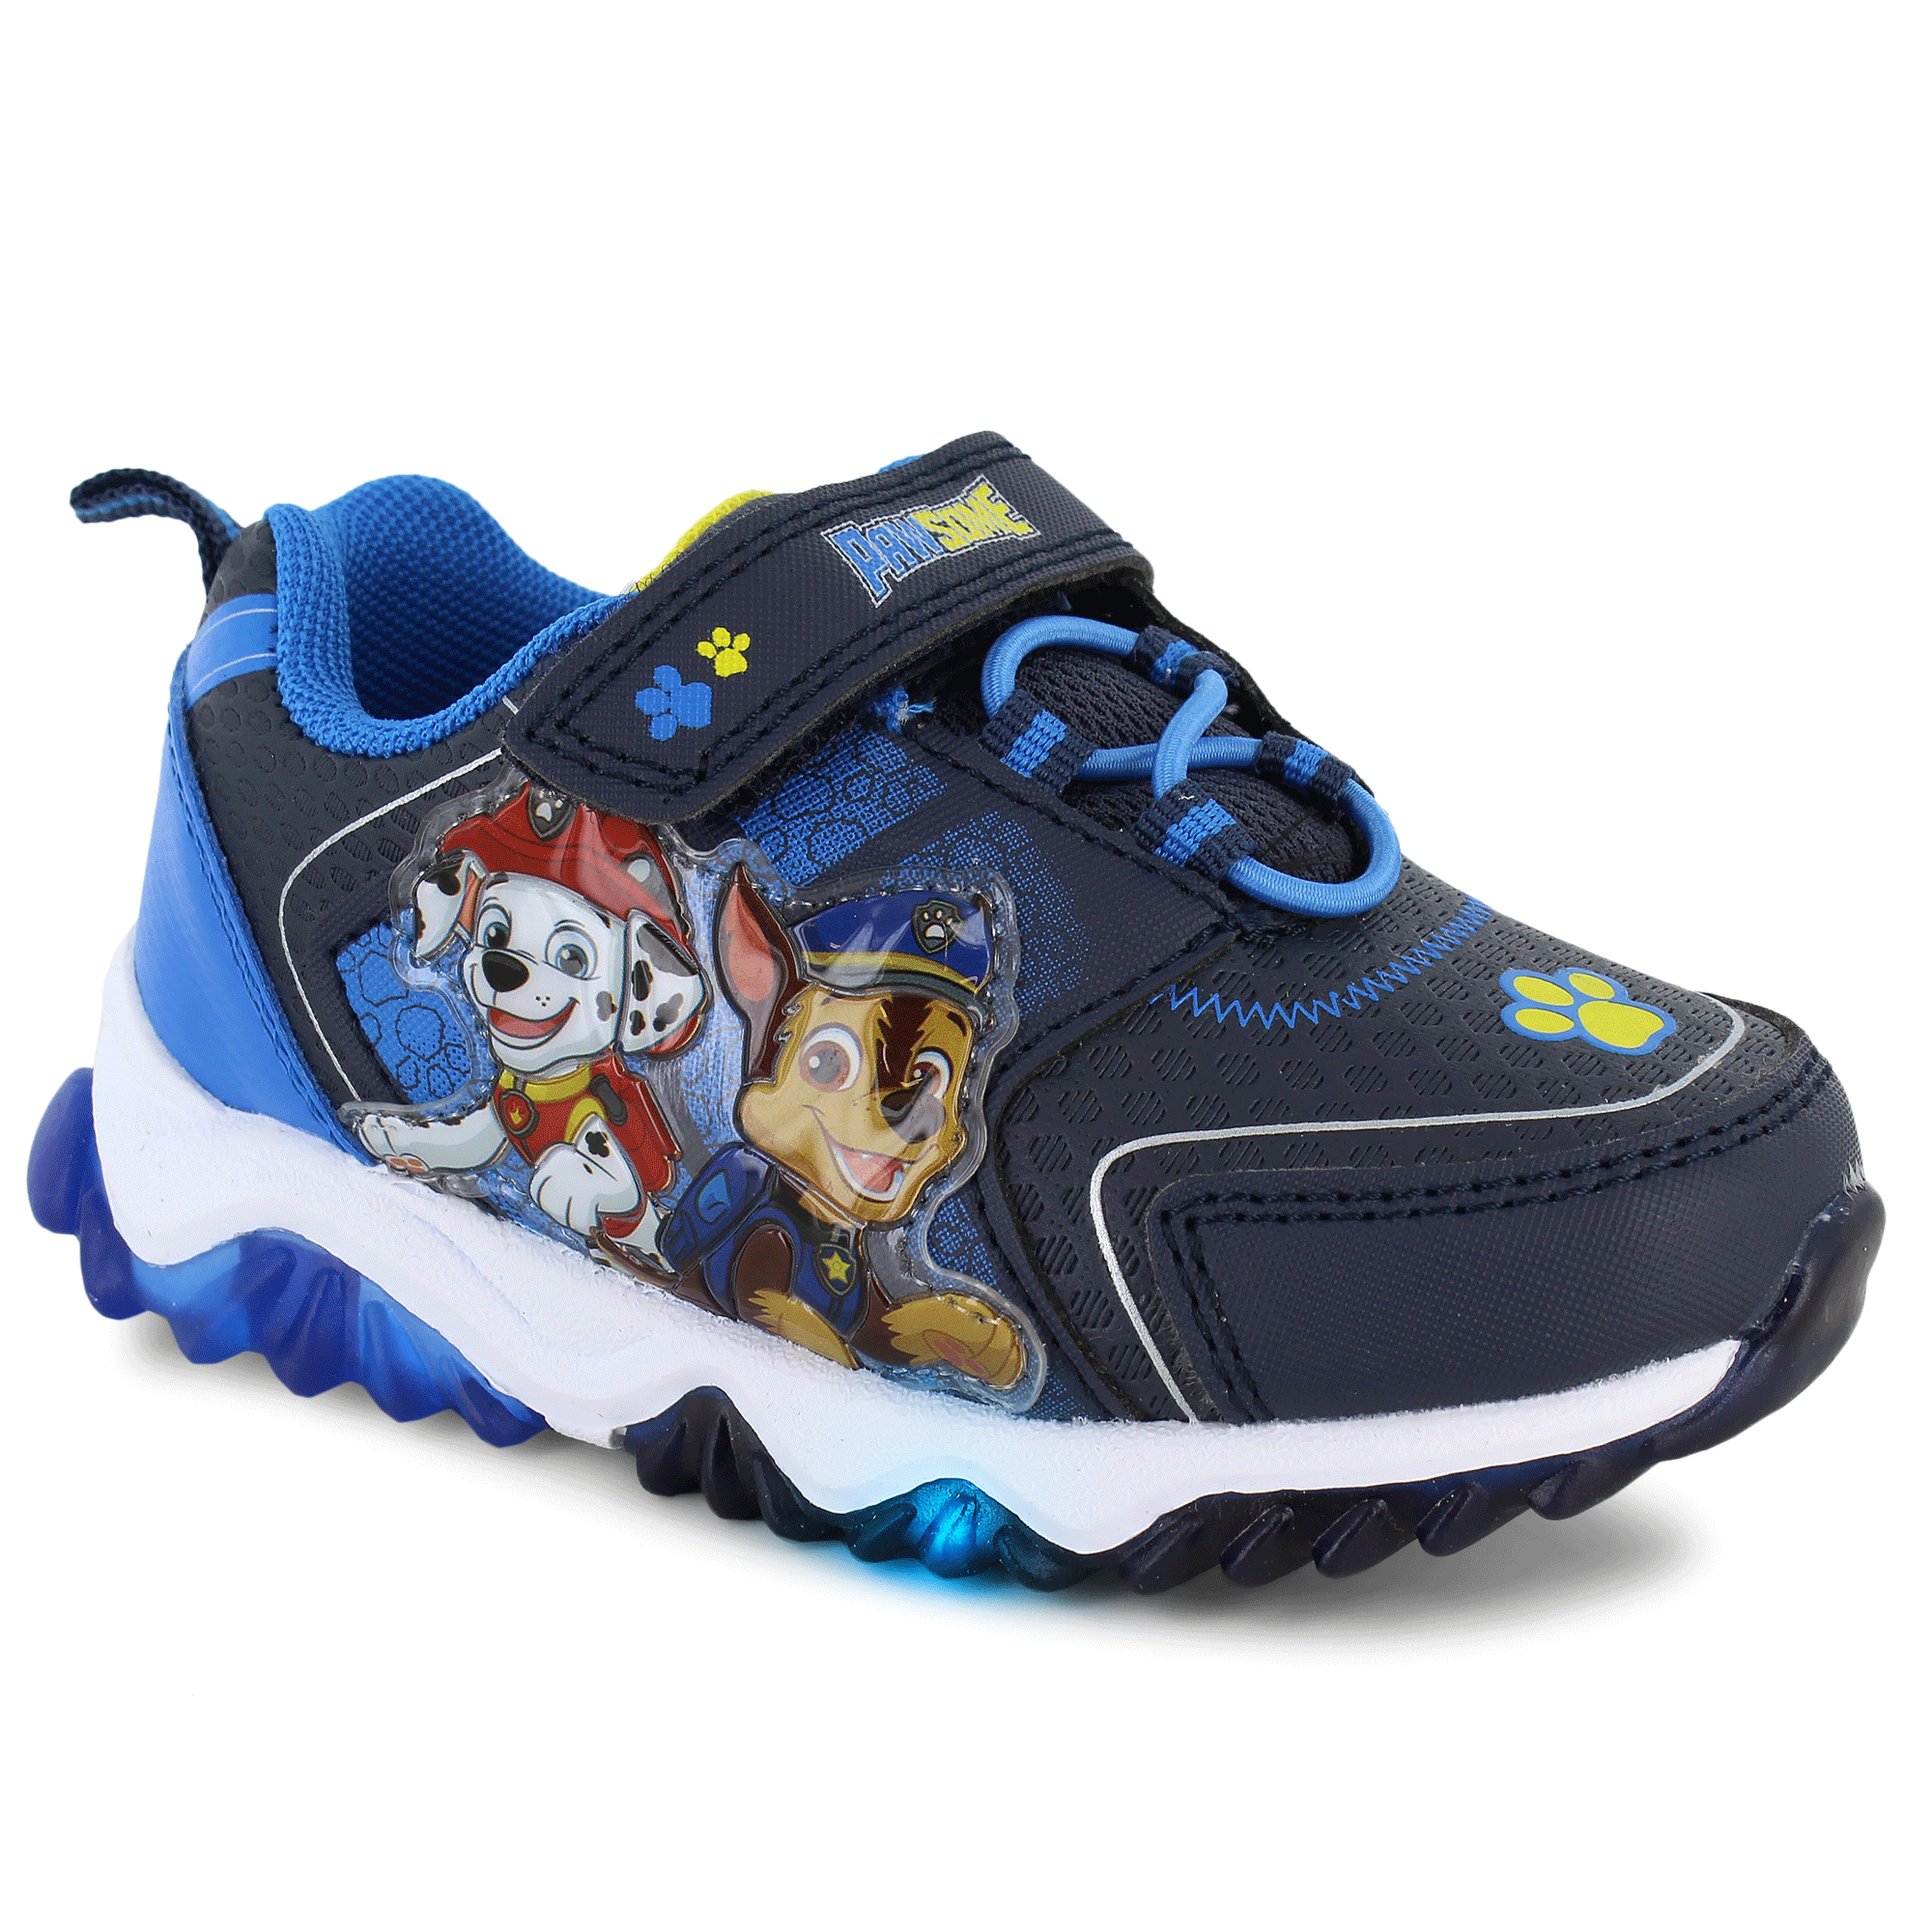 paw patrol light up shoes size 13